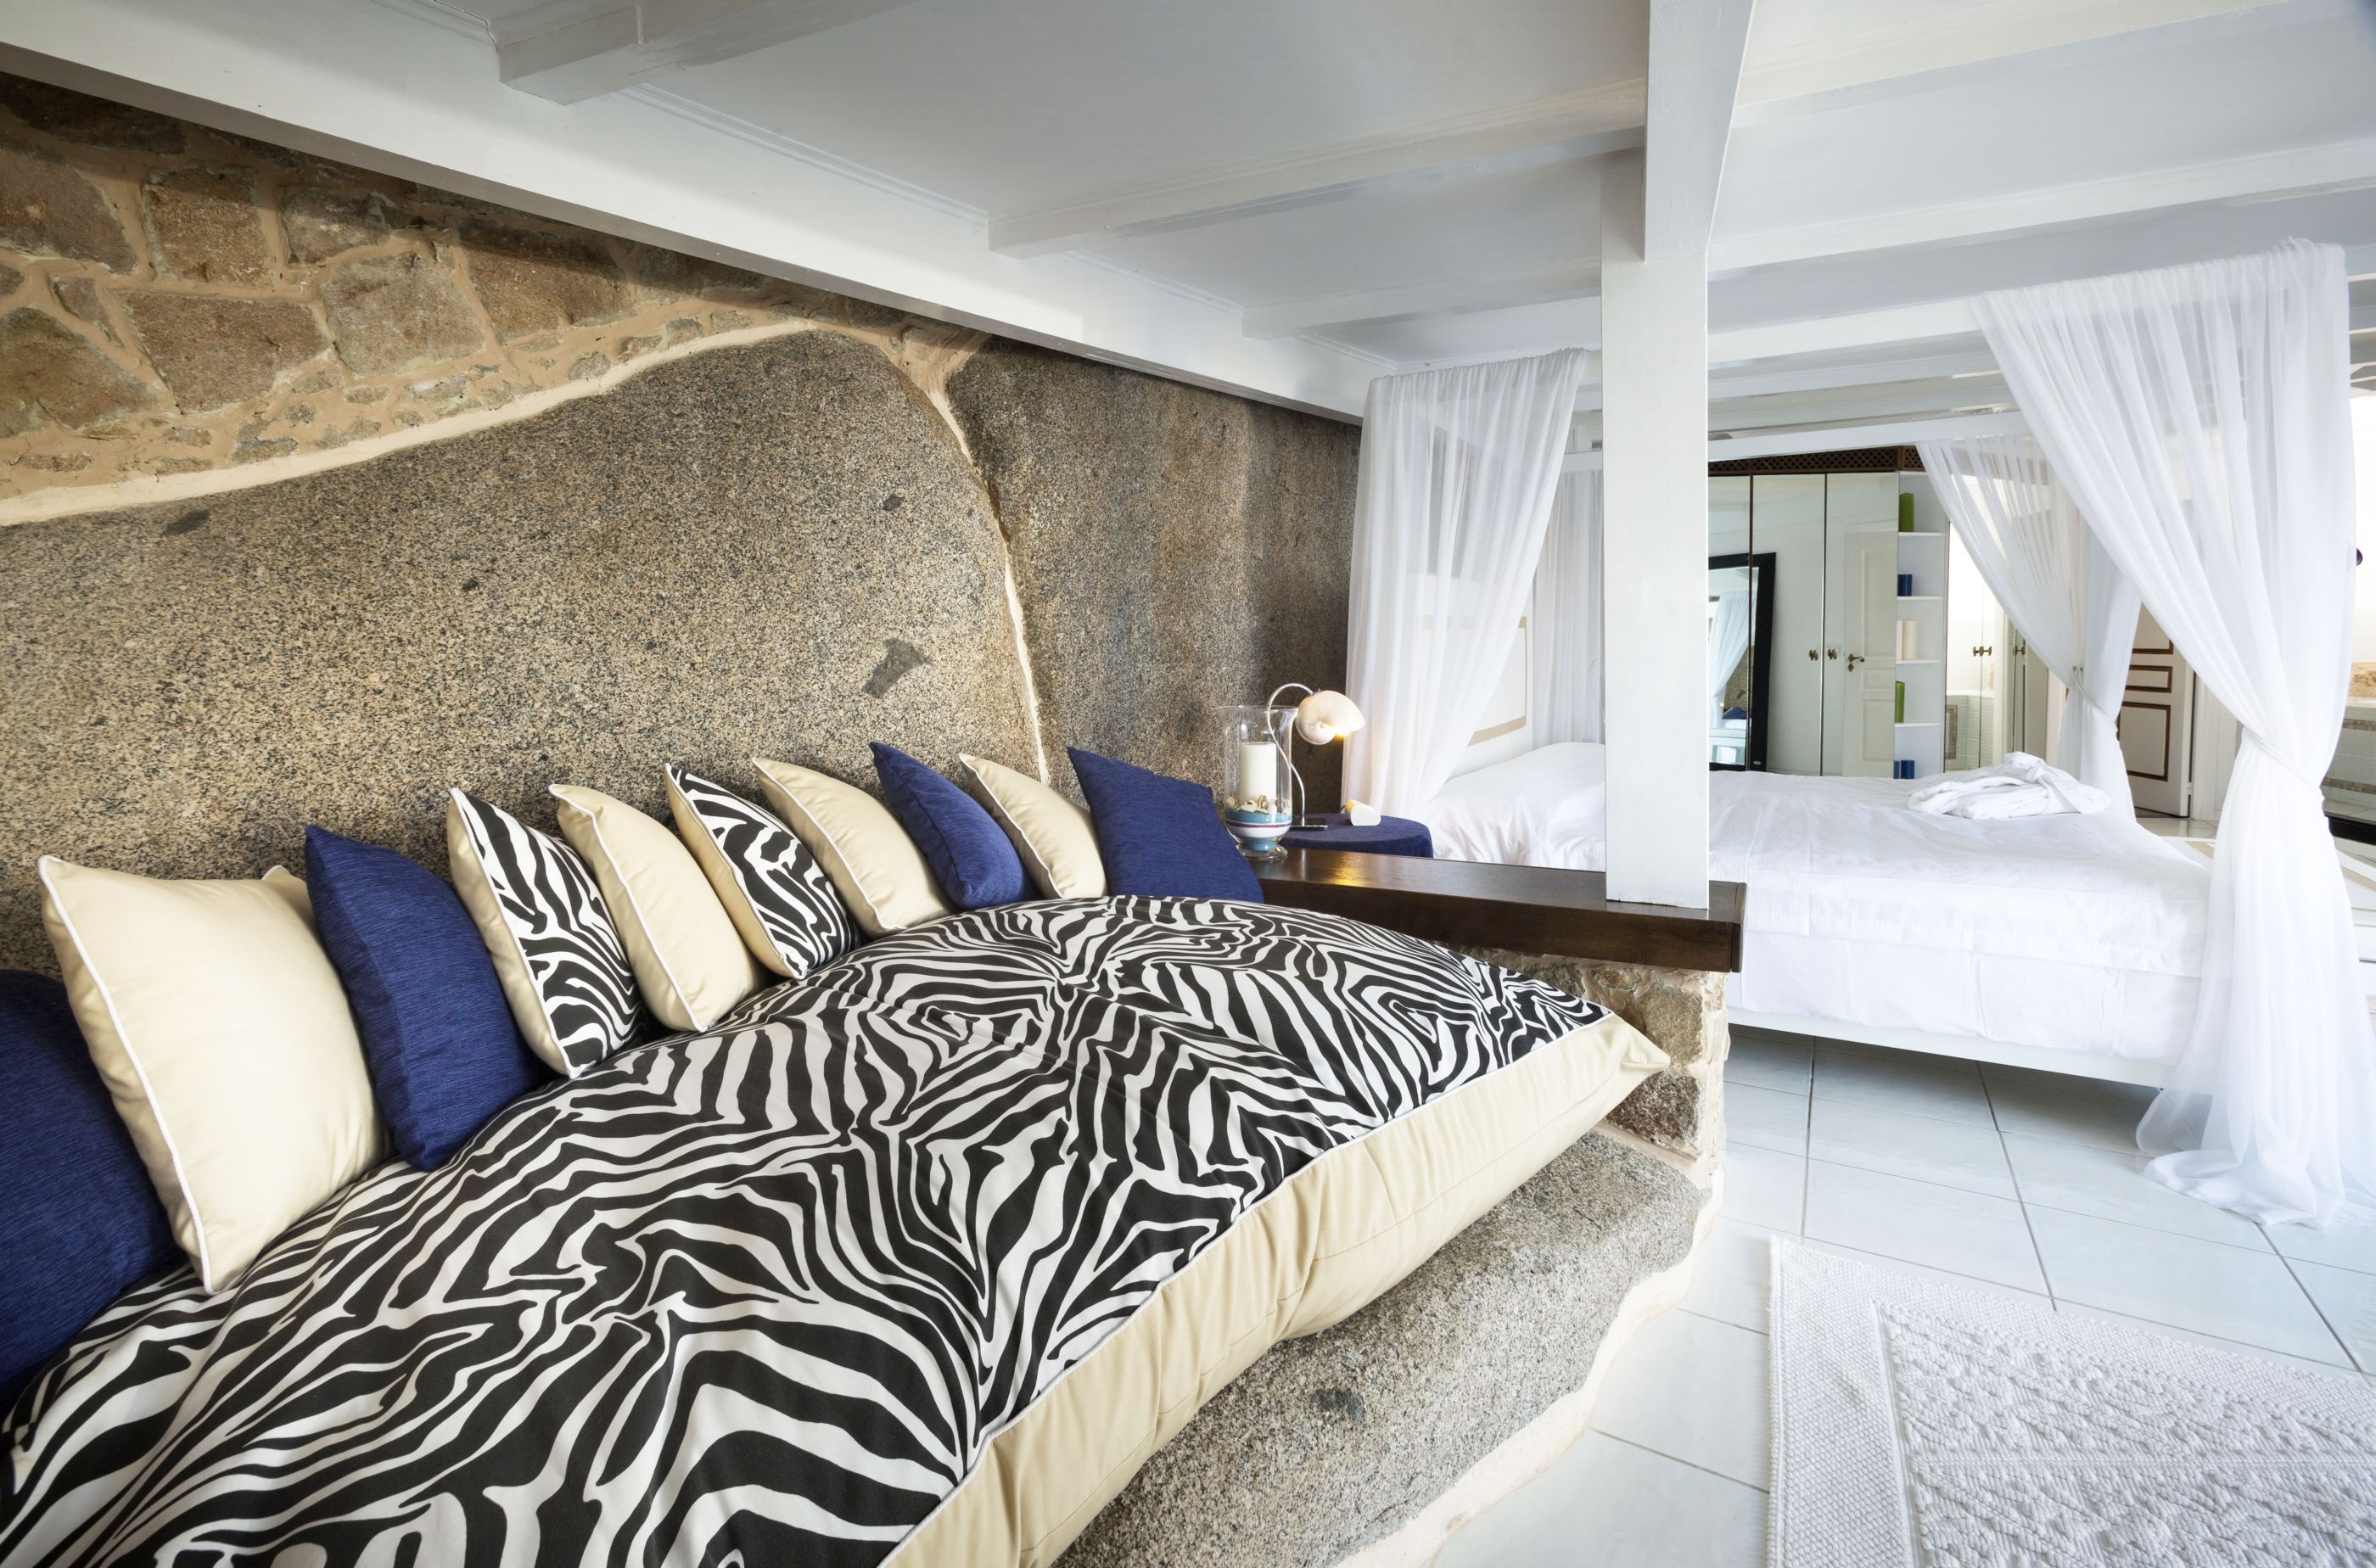 striped furnishings in a bedroom at Hotel  & Spa des Pecheurs, Corsica, France